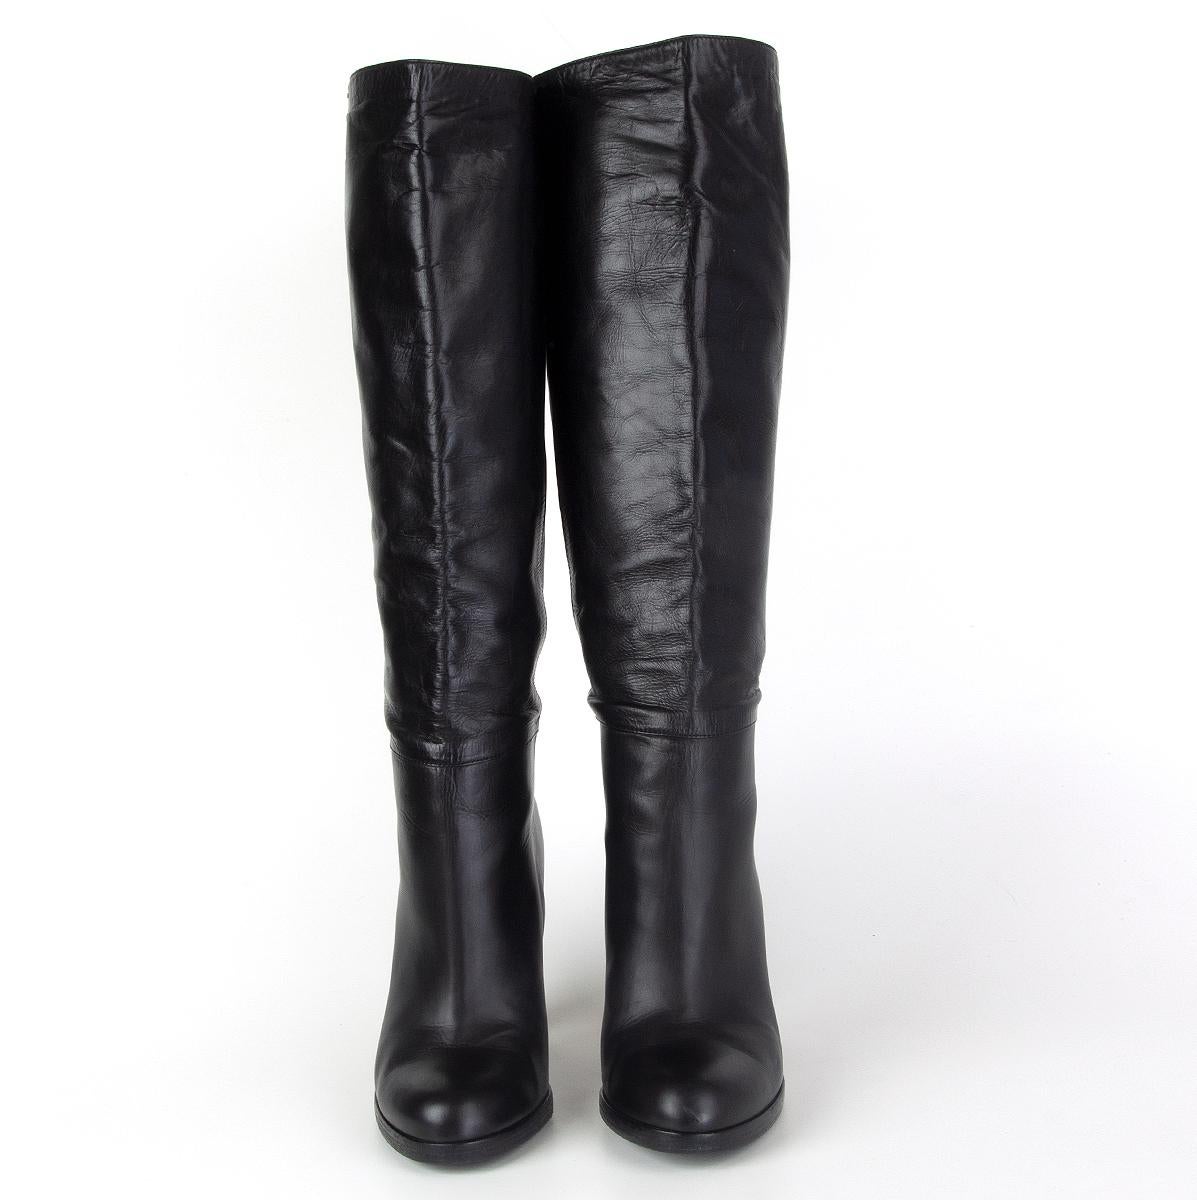 100% authentic Gucci round-toe knee-high boots in black calfskin and Gucci logo on heel. Have been worn and are in excellent condition. Rubber sole has been added. Come with dust bag. 

Measurements
Imprinted Size	35
Shoe Size	35
Inside Sole	22.5cm